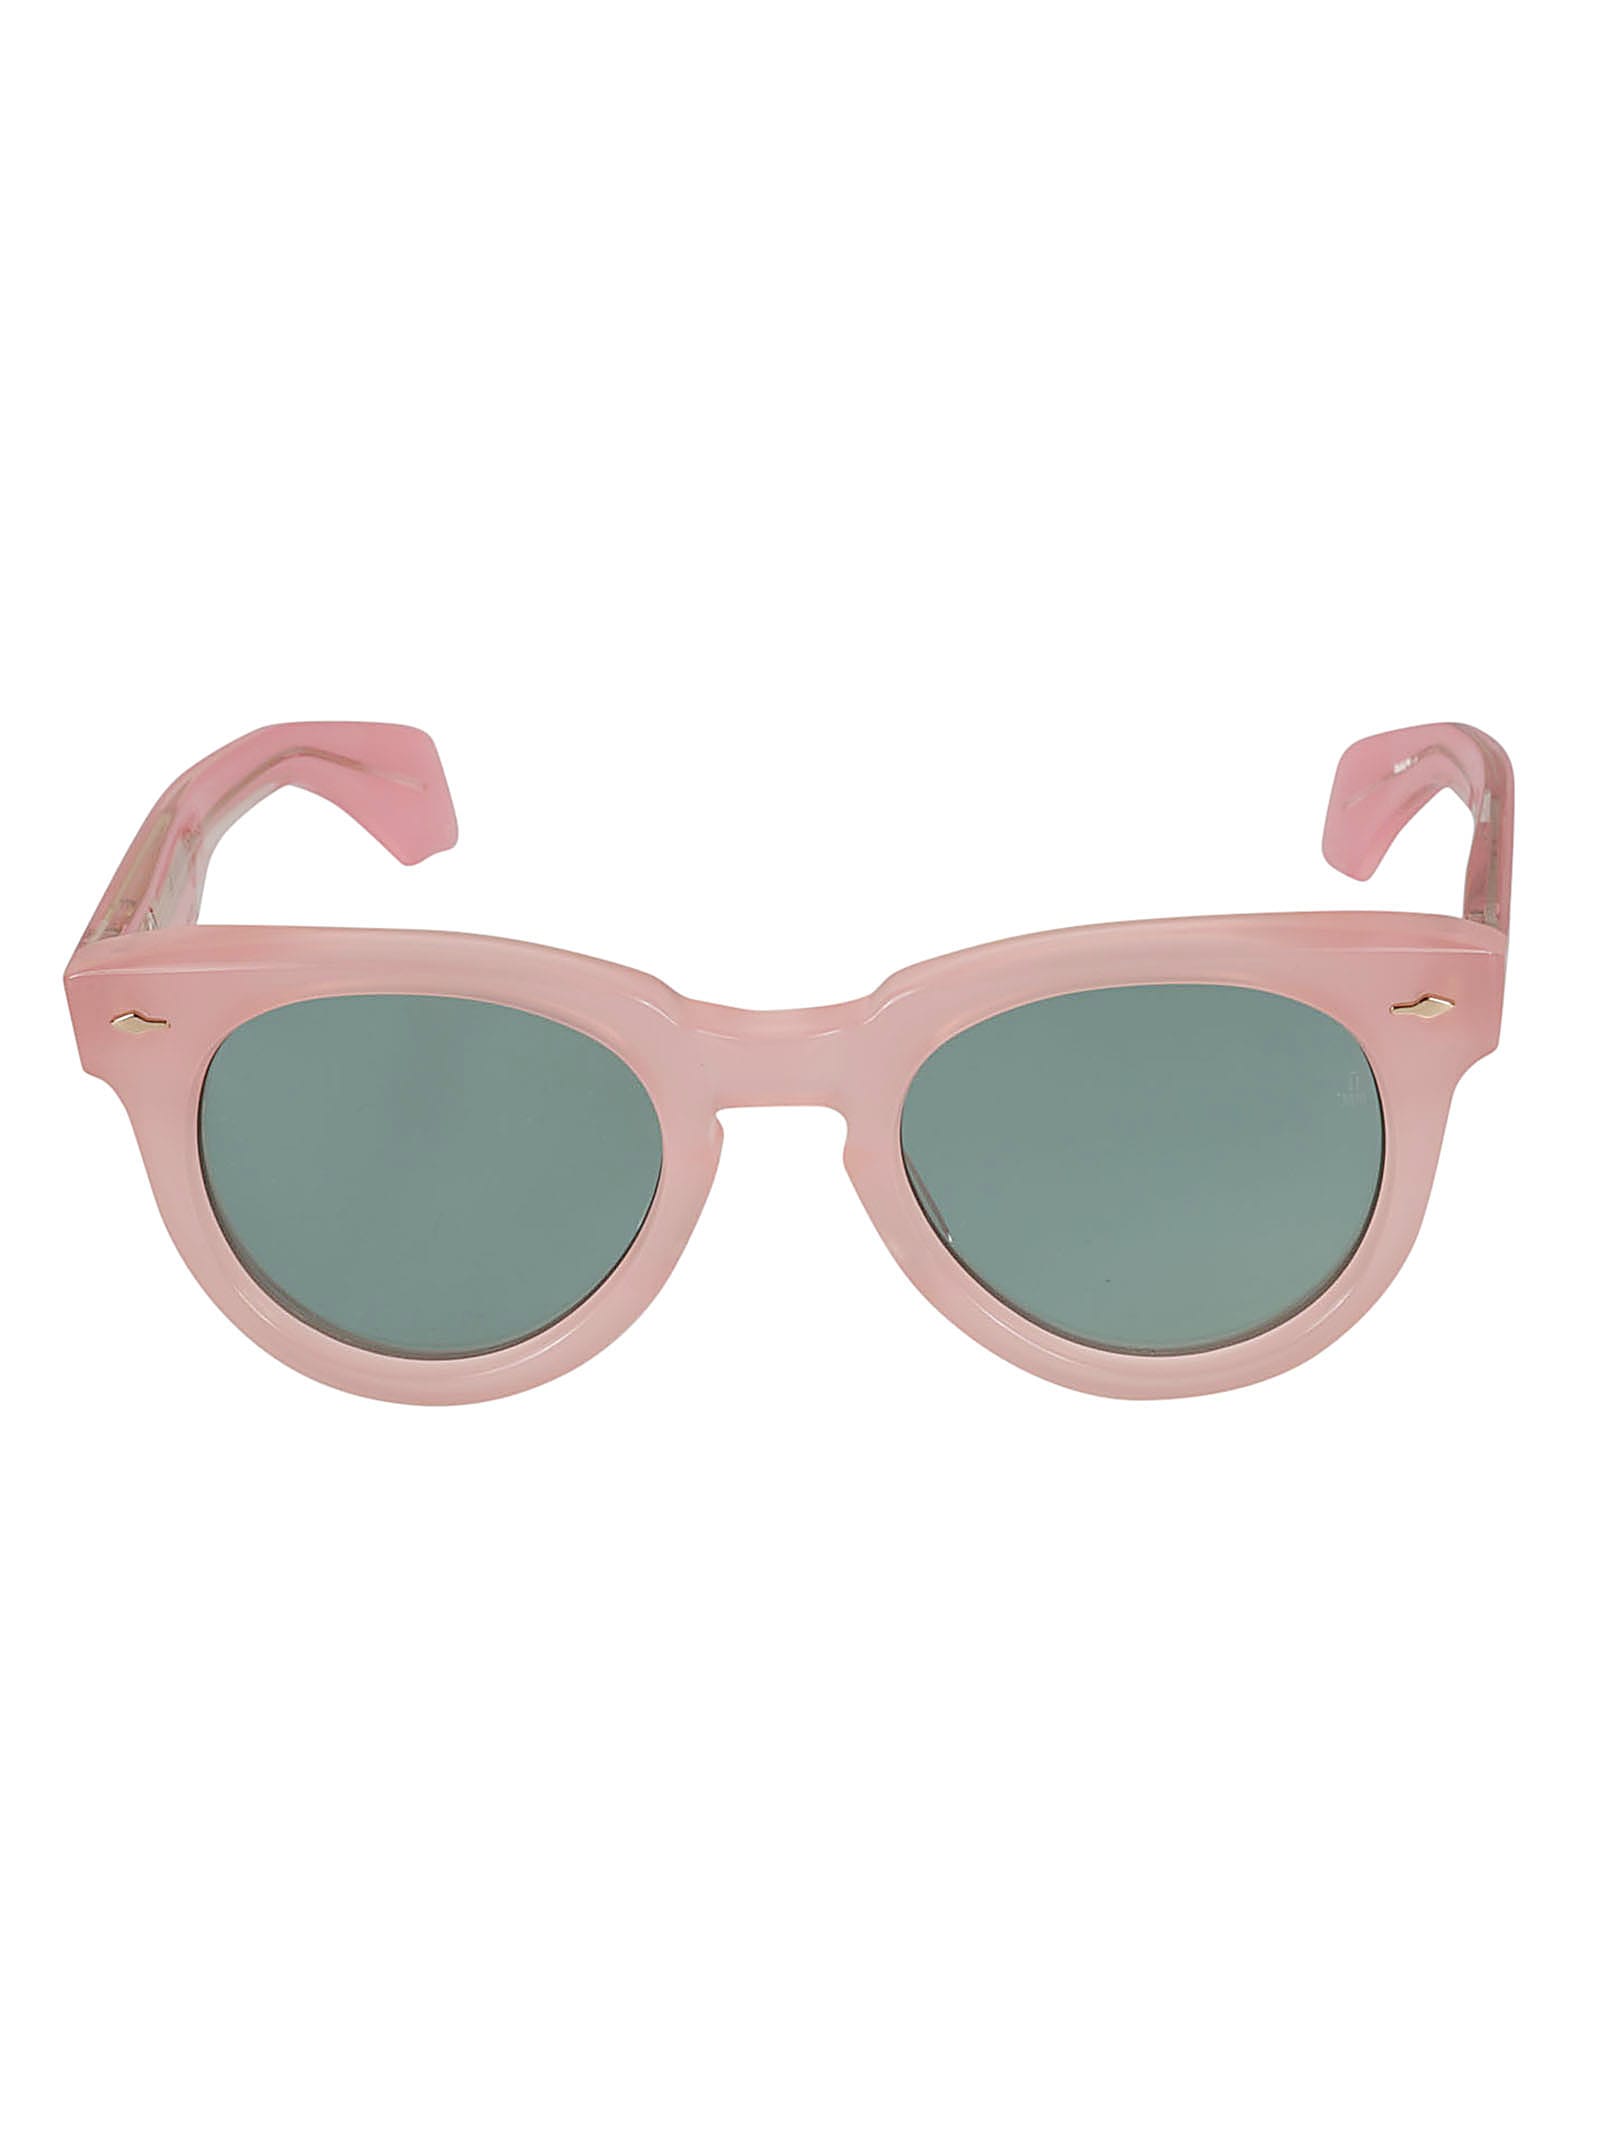 Jacques Marie Mage Round Thick Sunglasses In Daisy